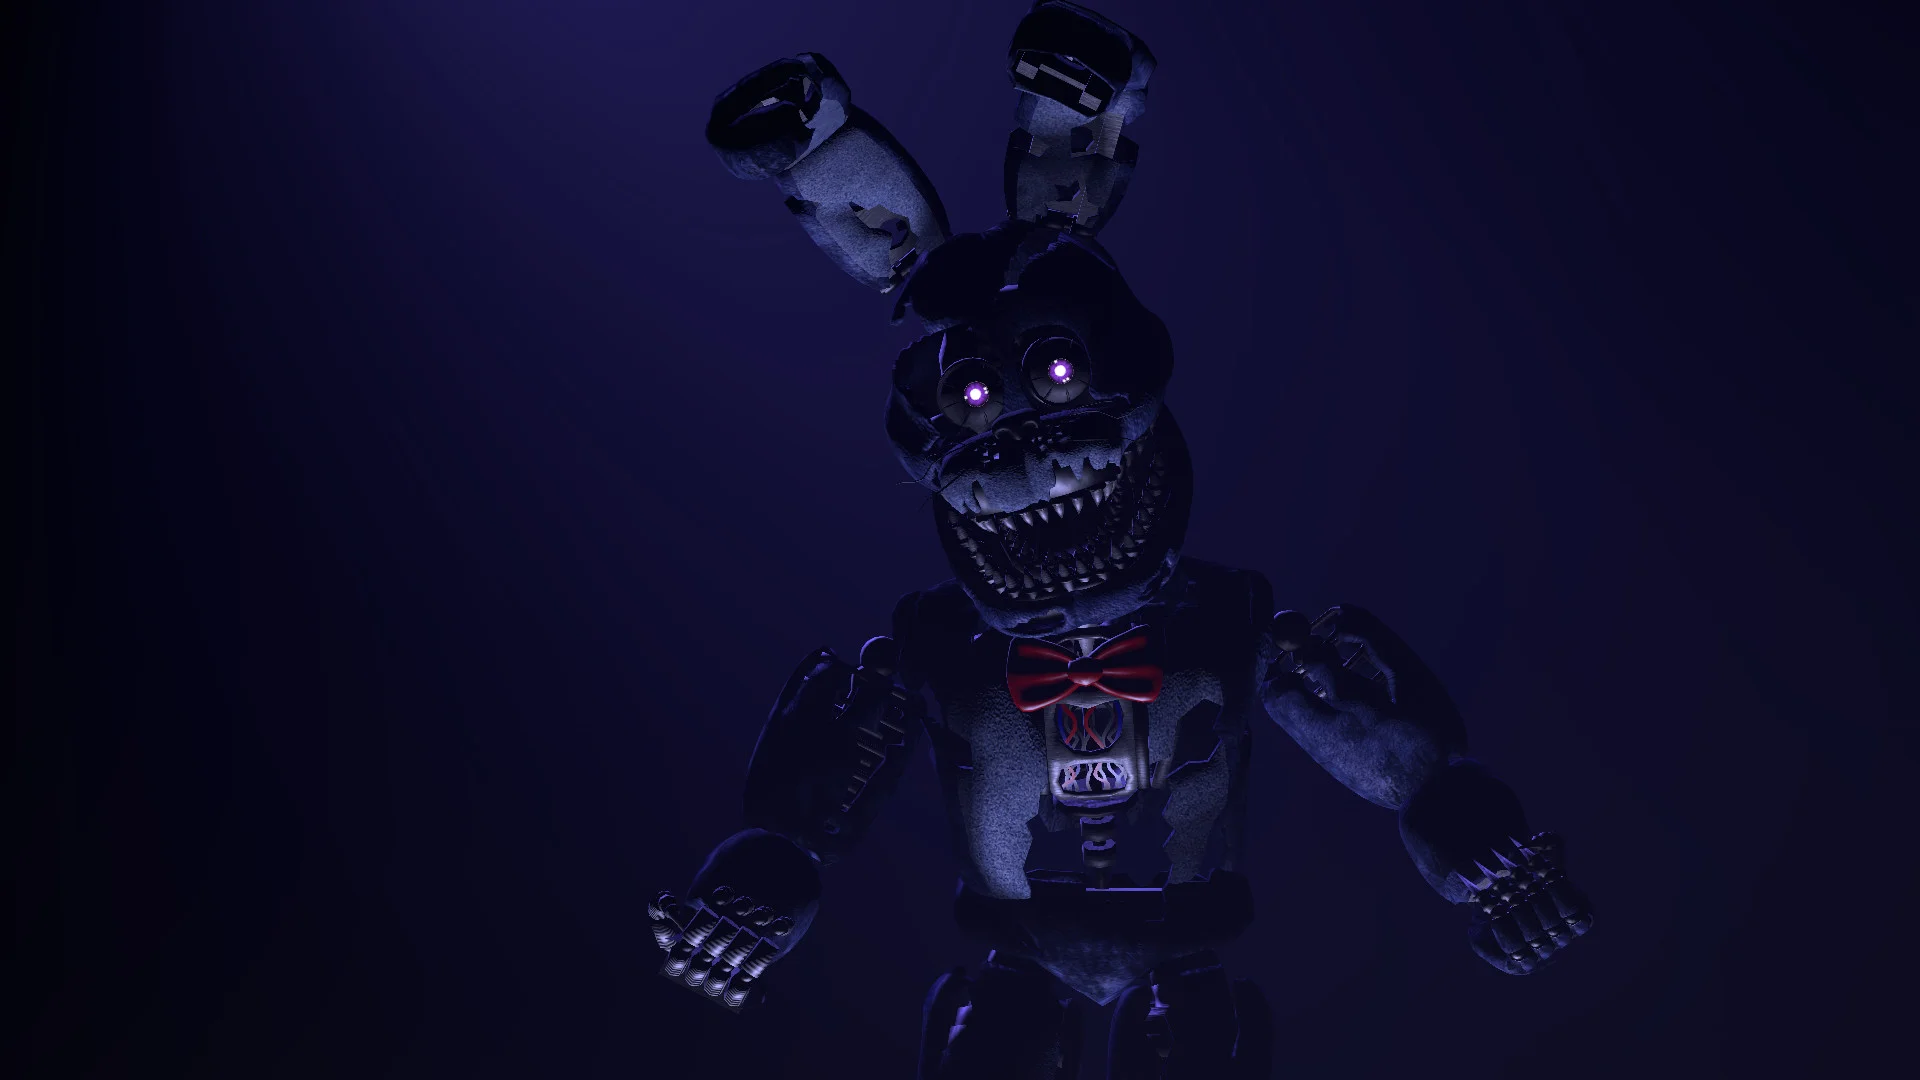 FNAF Nightmare Bonnie HD Wallpapers Free Download Unique High Resolution Wallpapers